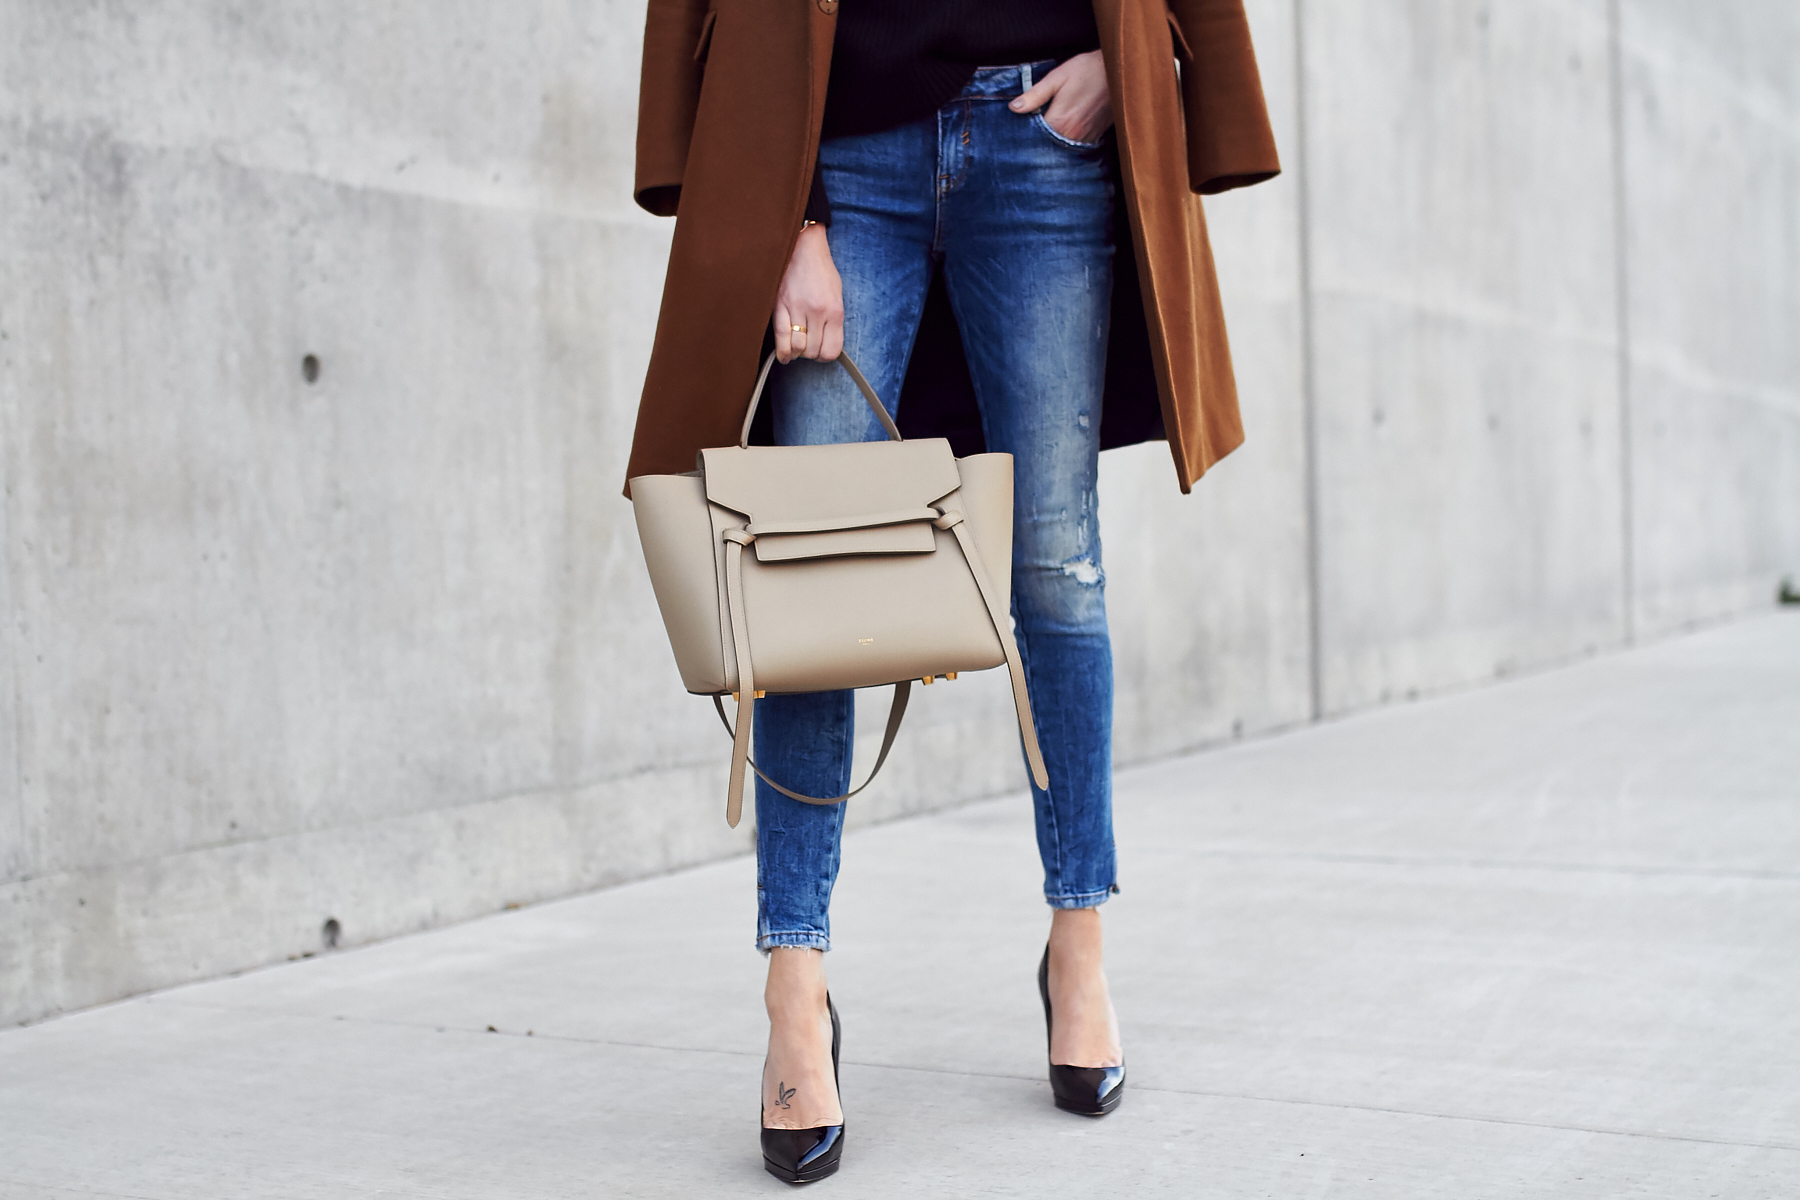 Fall Outfit, Winter Outfit, Tan Topcoat, Black Sweater, Denim Ripped Skinny Jeans, Celine Tie Belt Bag, Black Louboutin Pumps